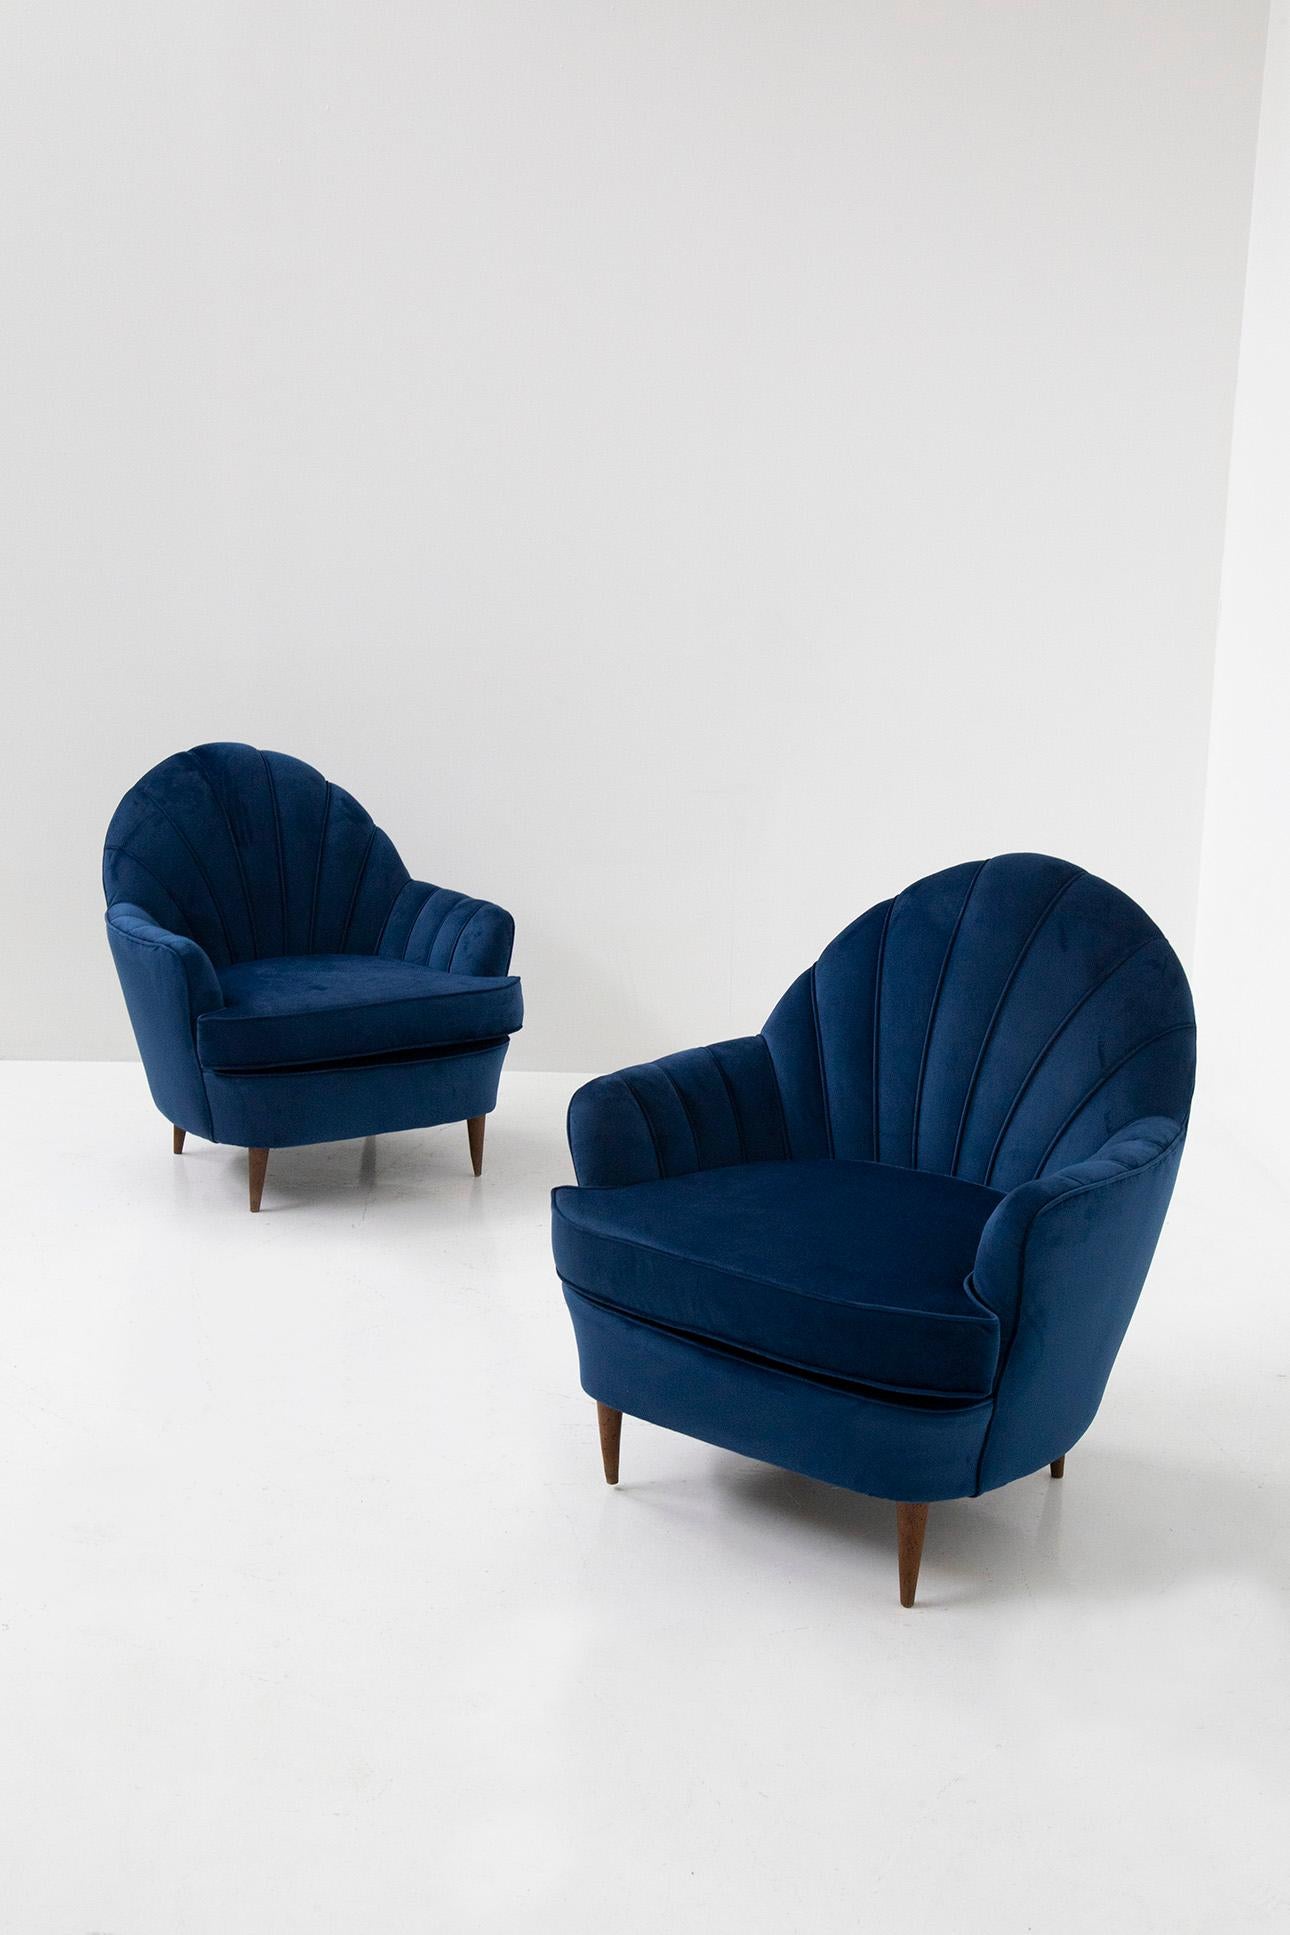 Elegant pair of 1950s Italian armchairs. The pair of armchairs feature a shell design typical of the Italian midcentury. The armchairs have recently been refreshed in an elegant blue velvet. Their most prominent feature is their shell-shaped